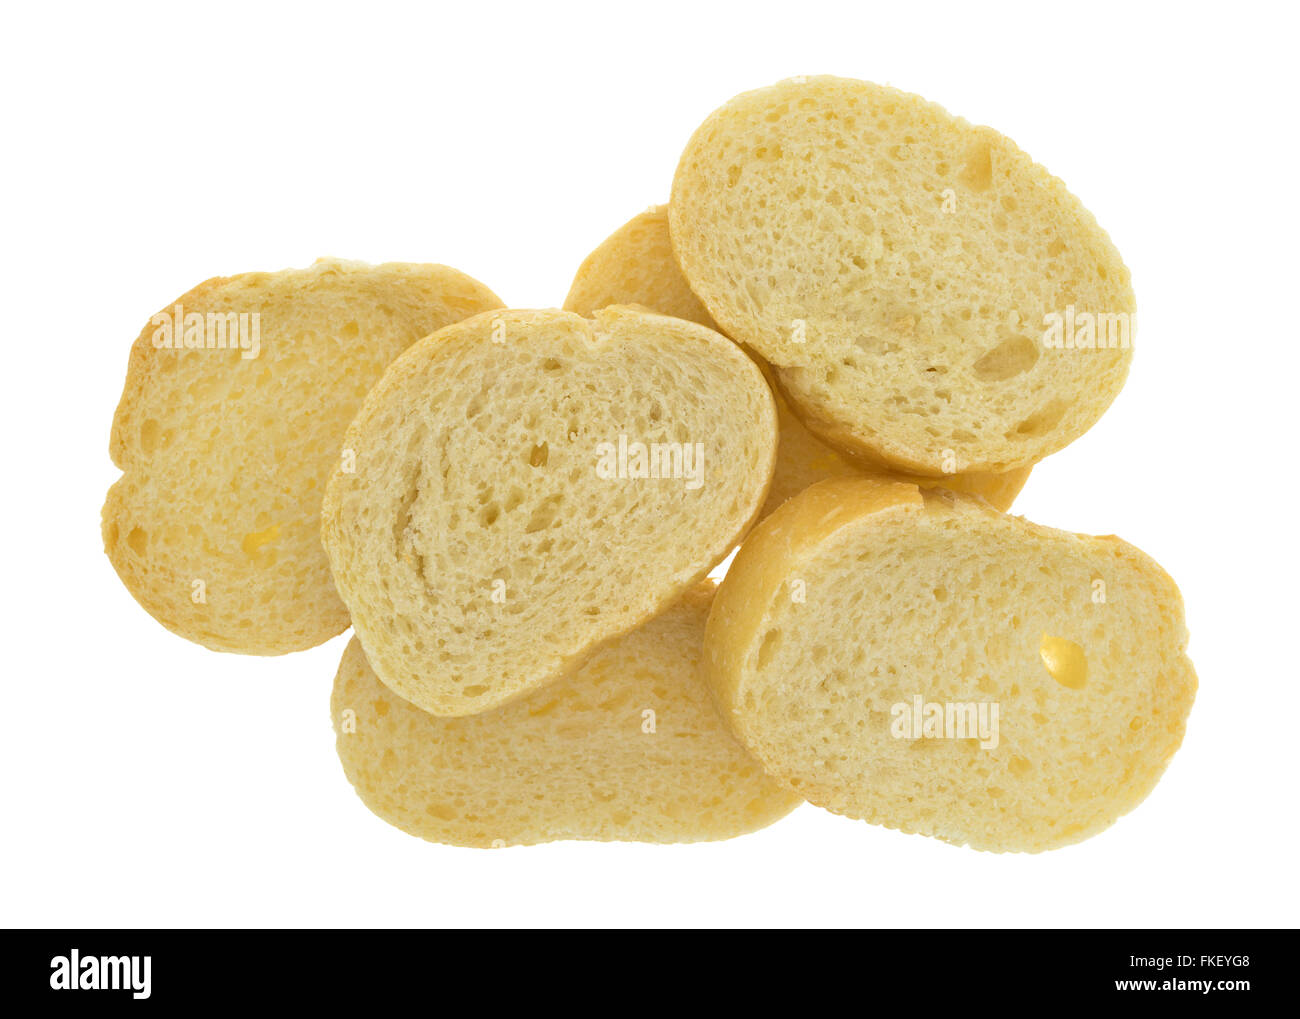 Top view of sliced French bread isolated on a white background. Stock Photo